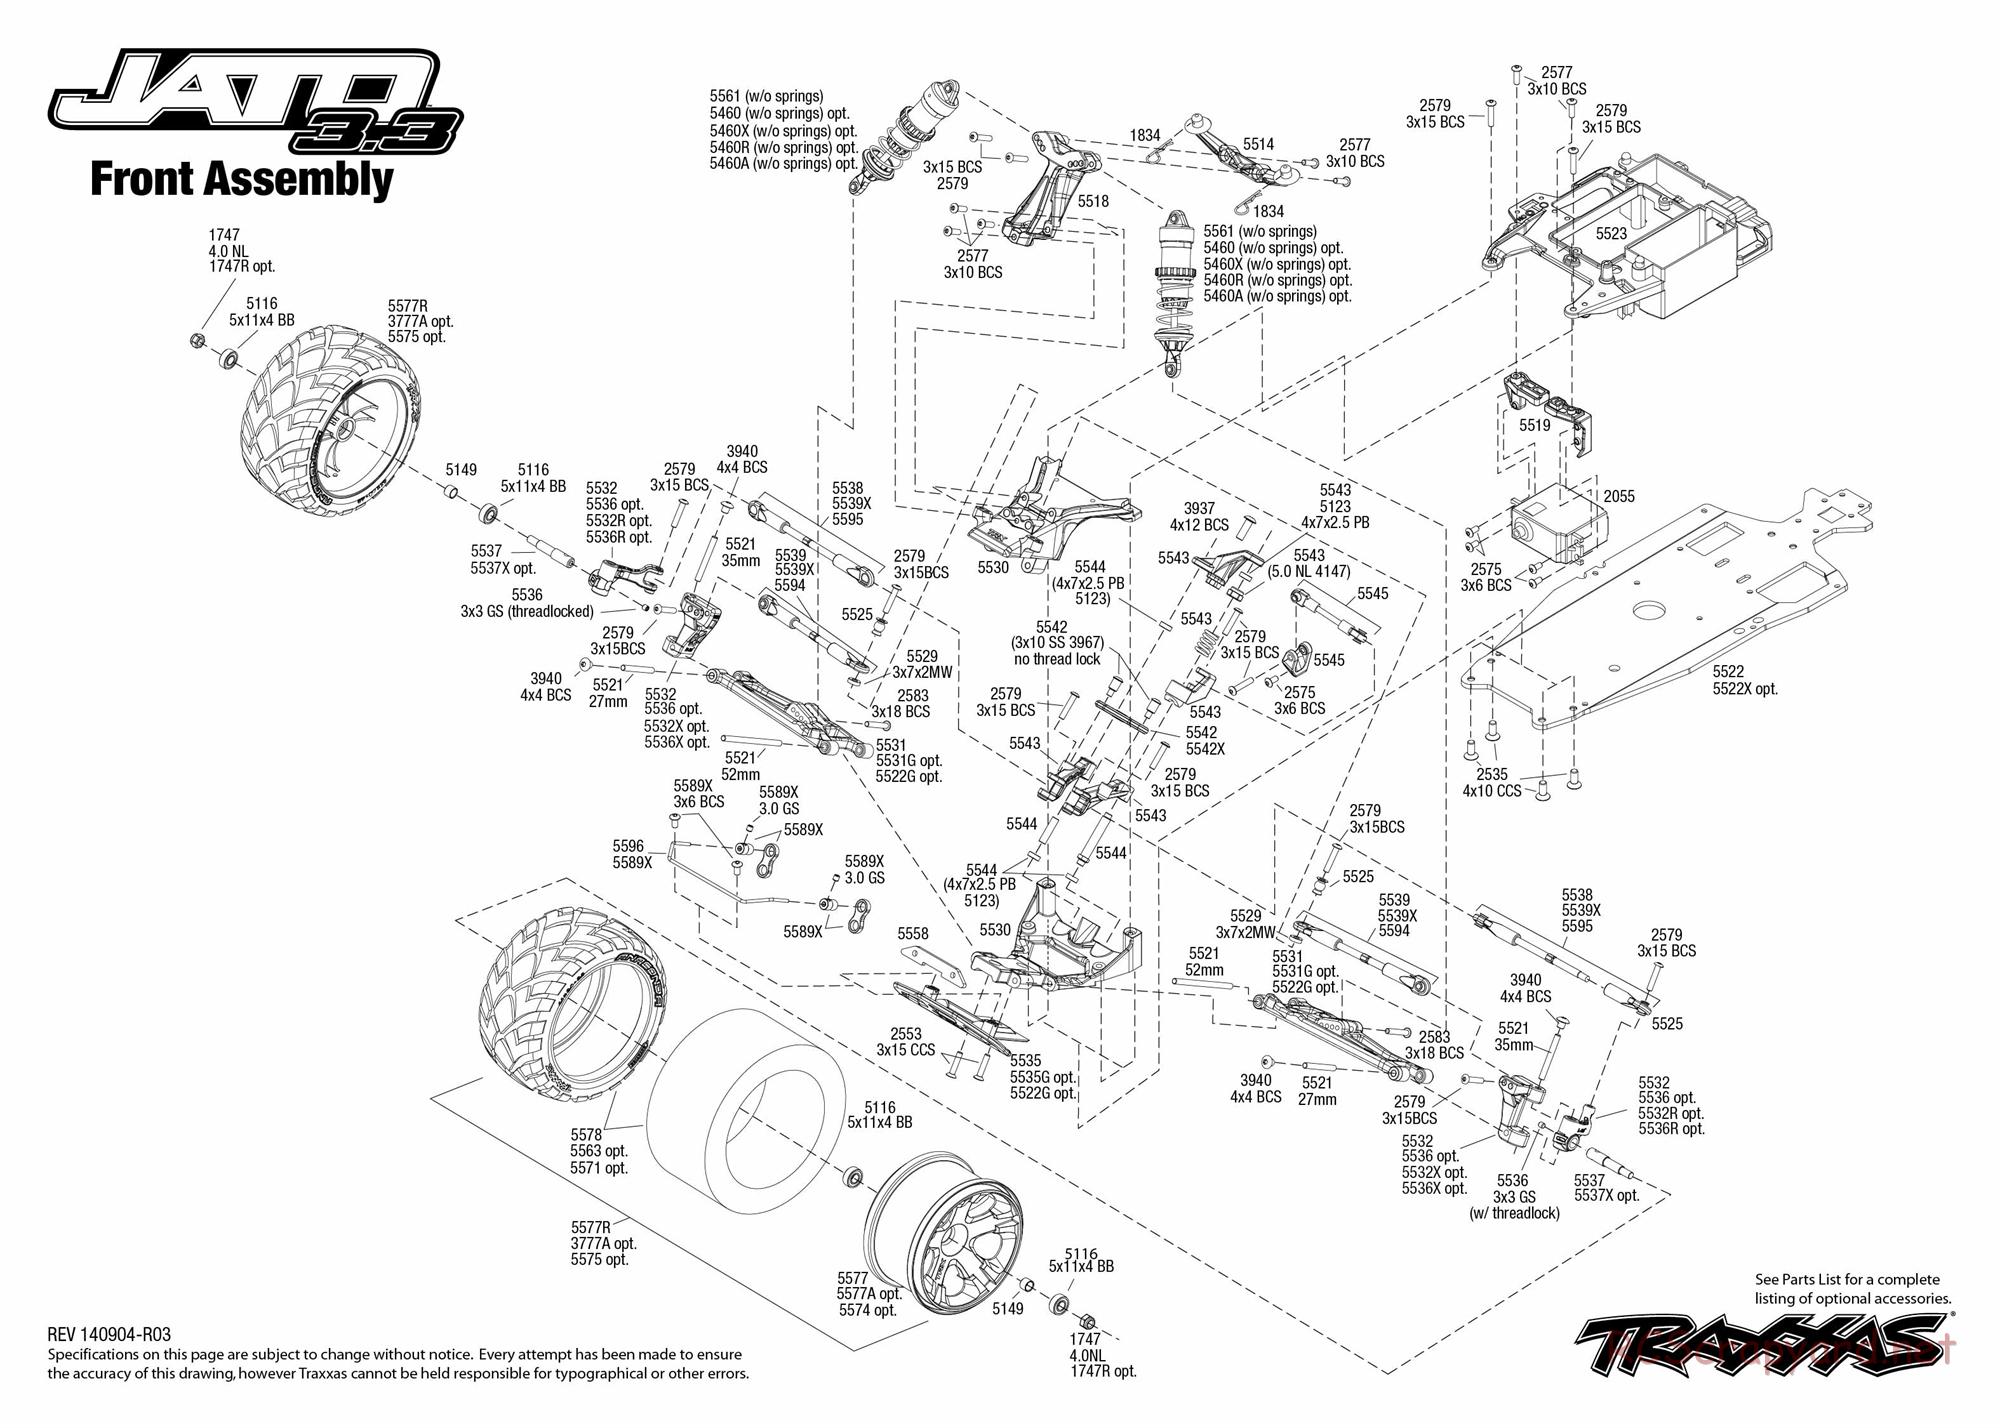 Traxxas - Jato 3.3 (2010) - Exploded Views - Page 3